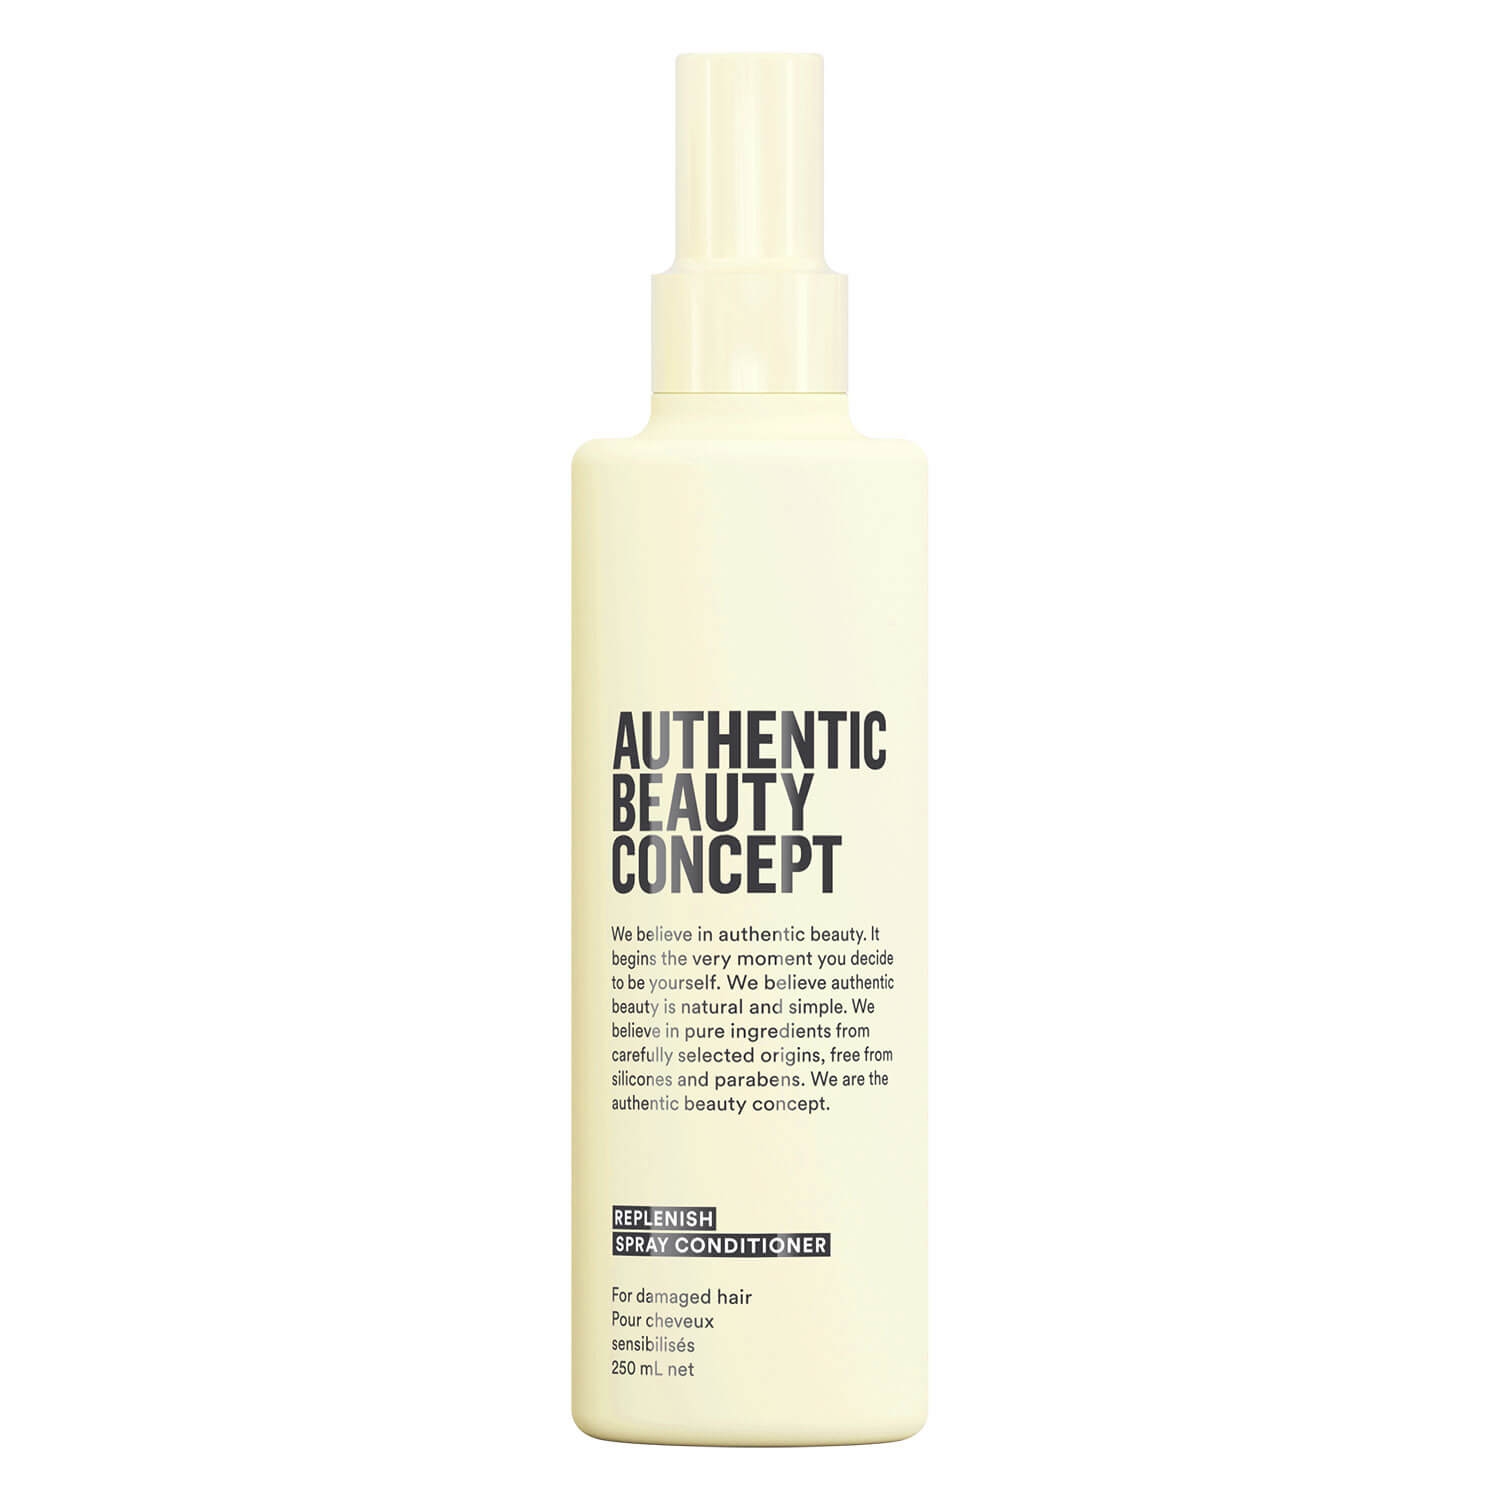 Product image from ABC Replenish - Spray Conditioner